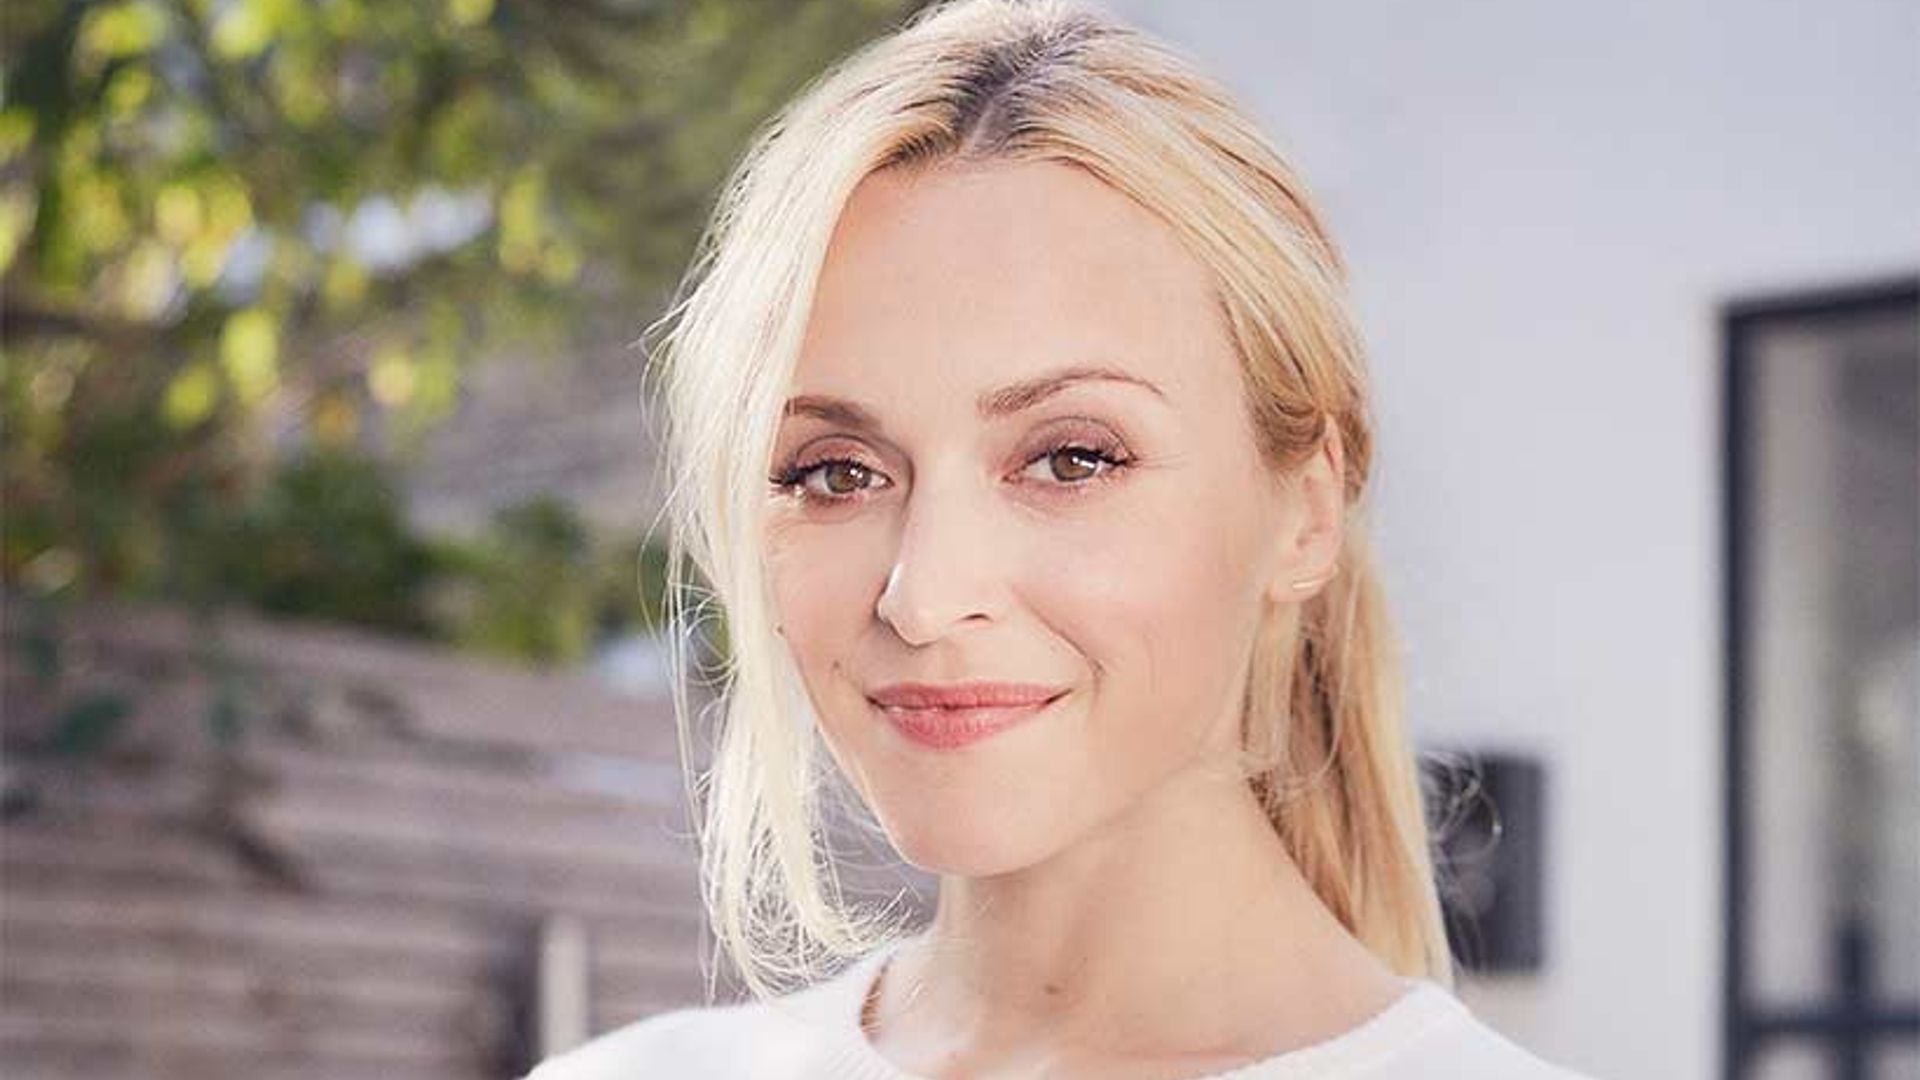 Fearne Cotton's coconut-crusted haddock fingers and mushy peas recipe